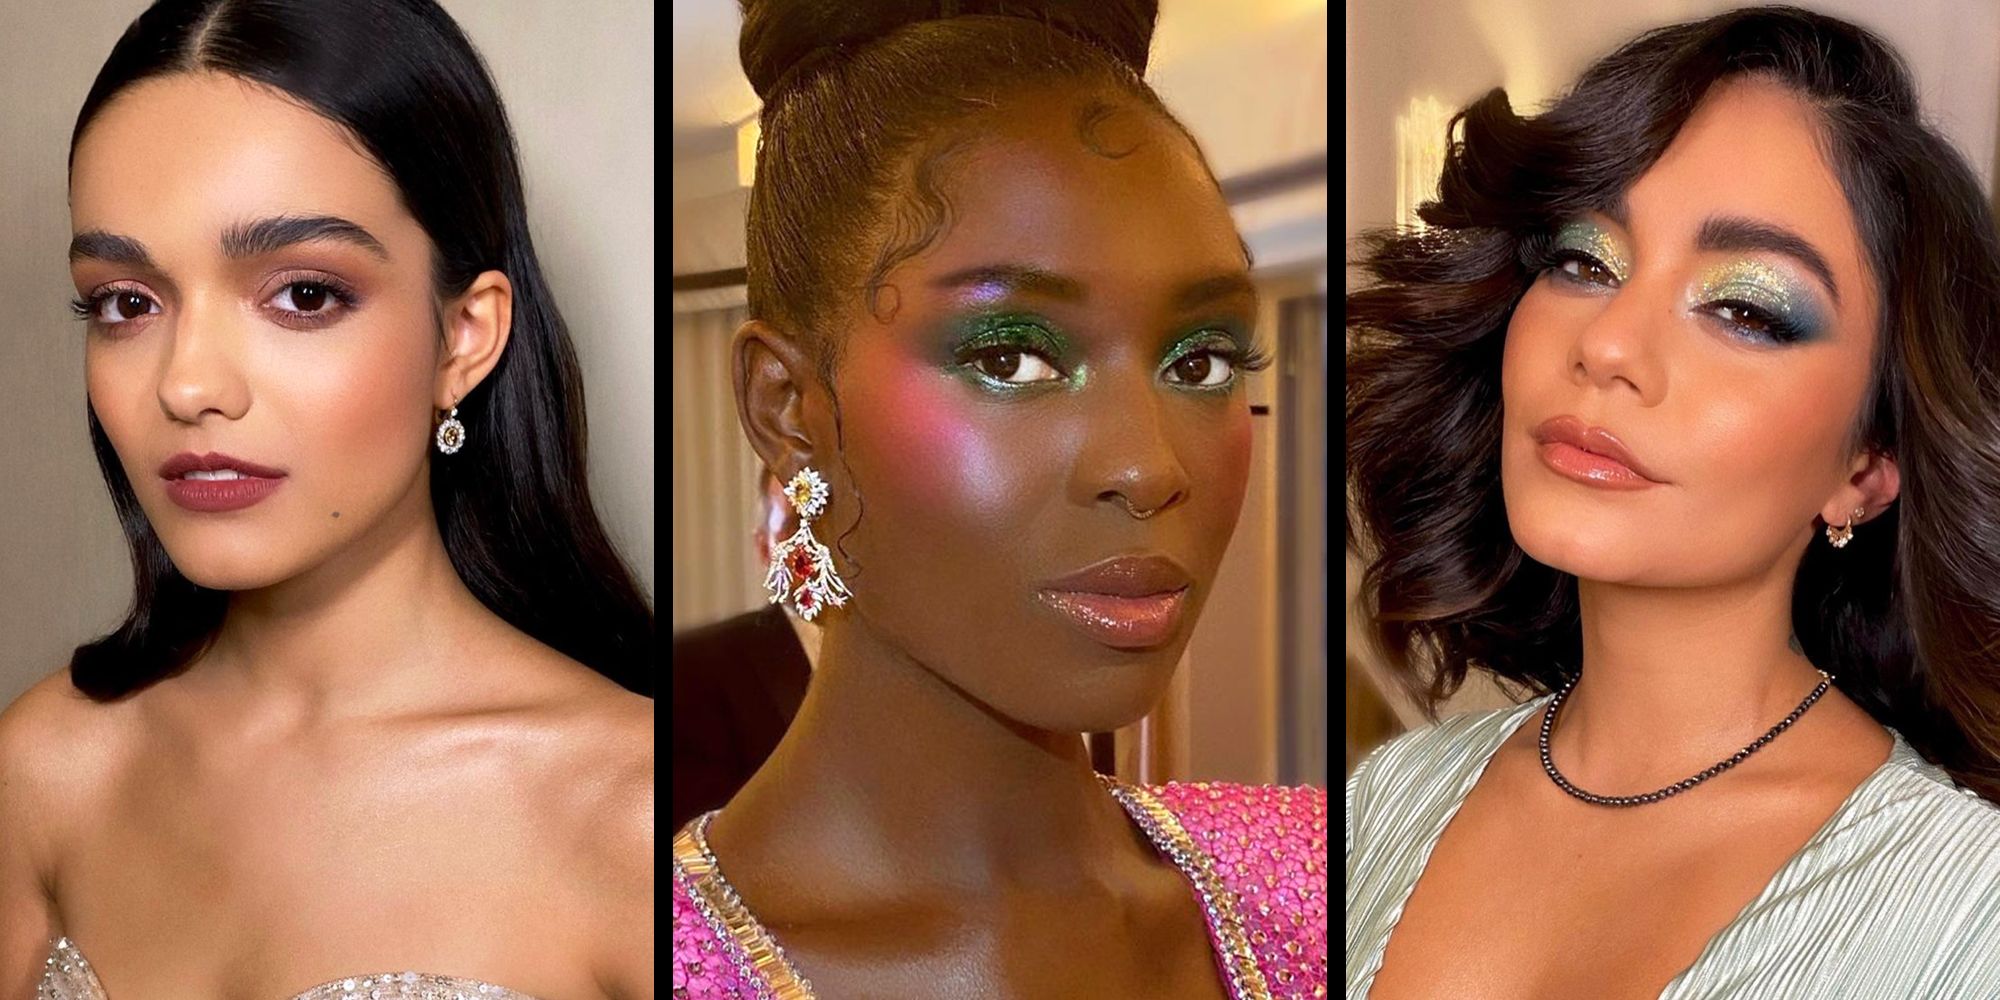 5 Cute Makeup Looks To Try For Spring Break 2022